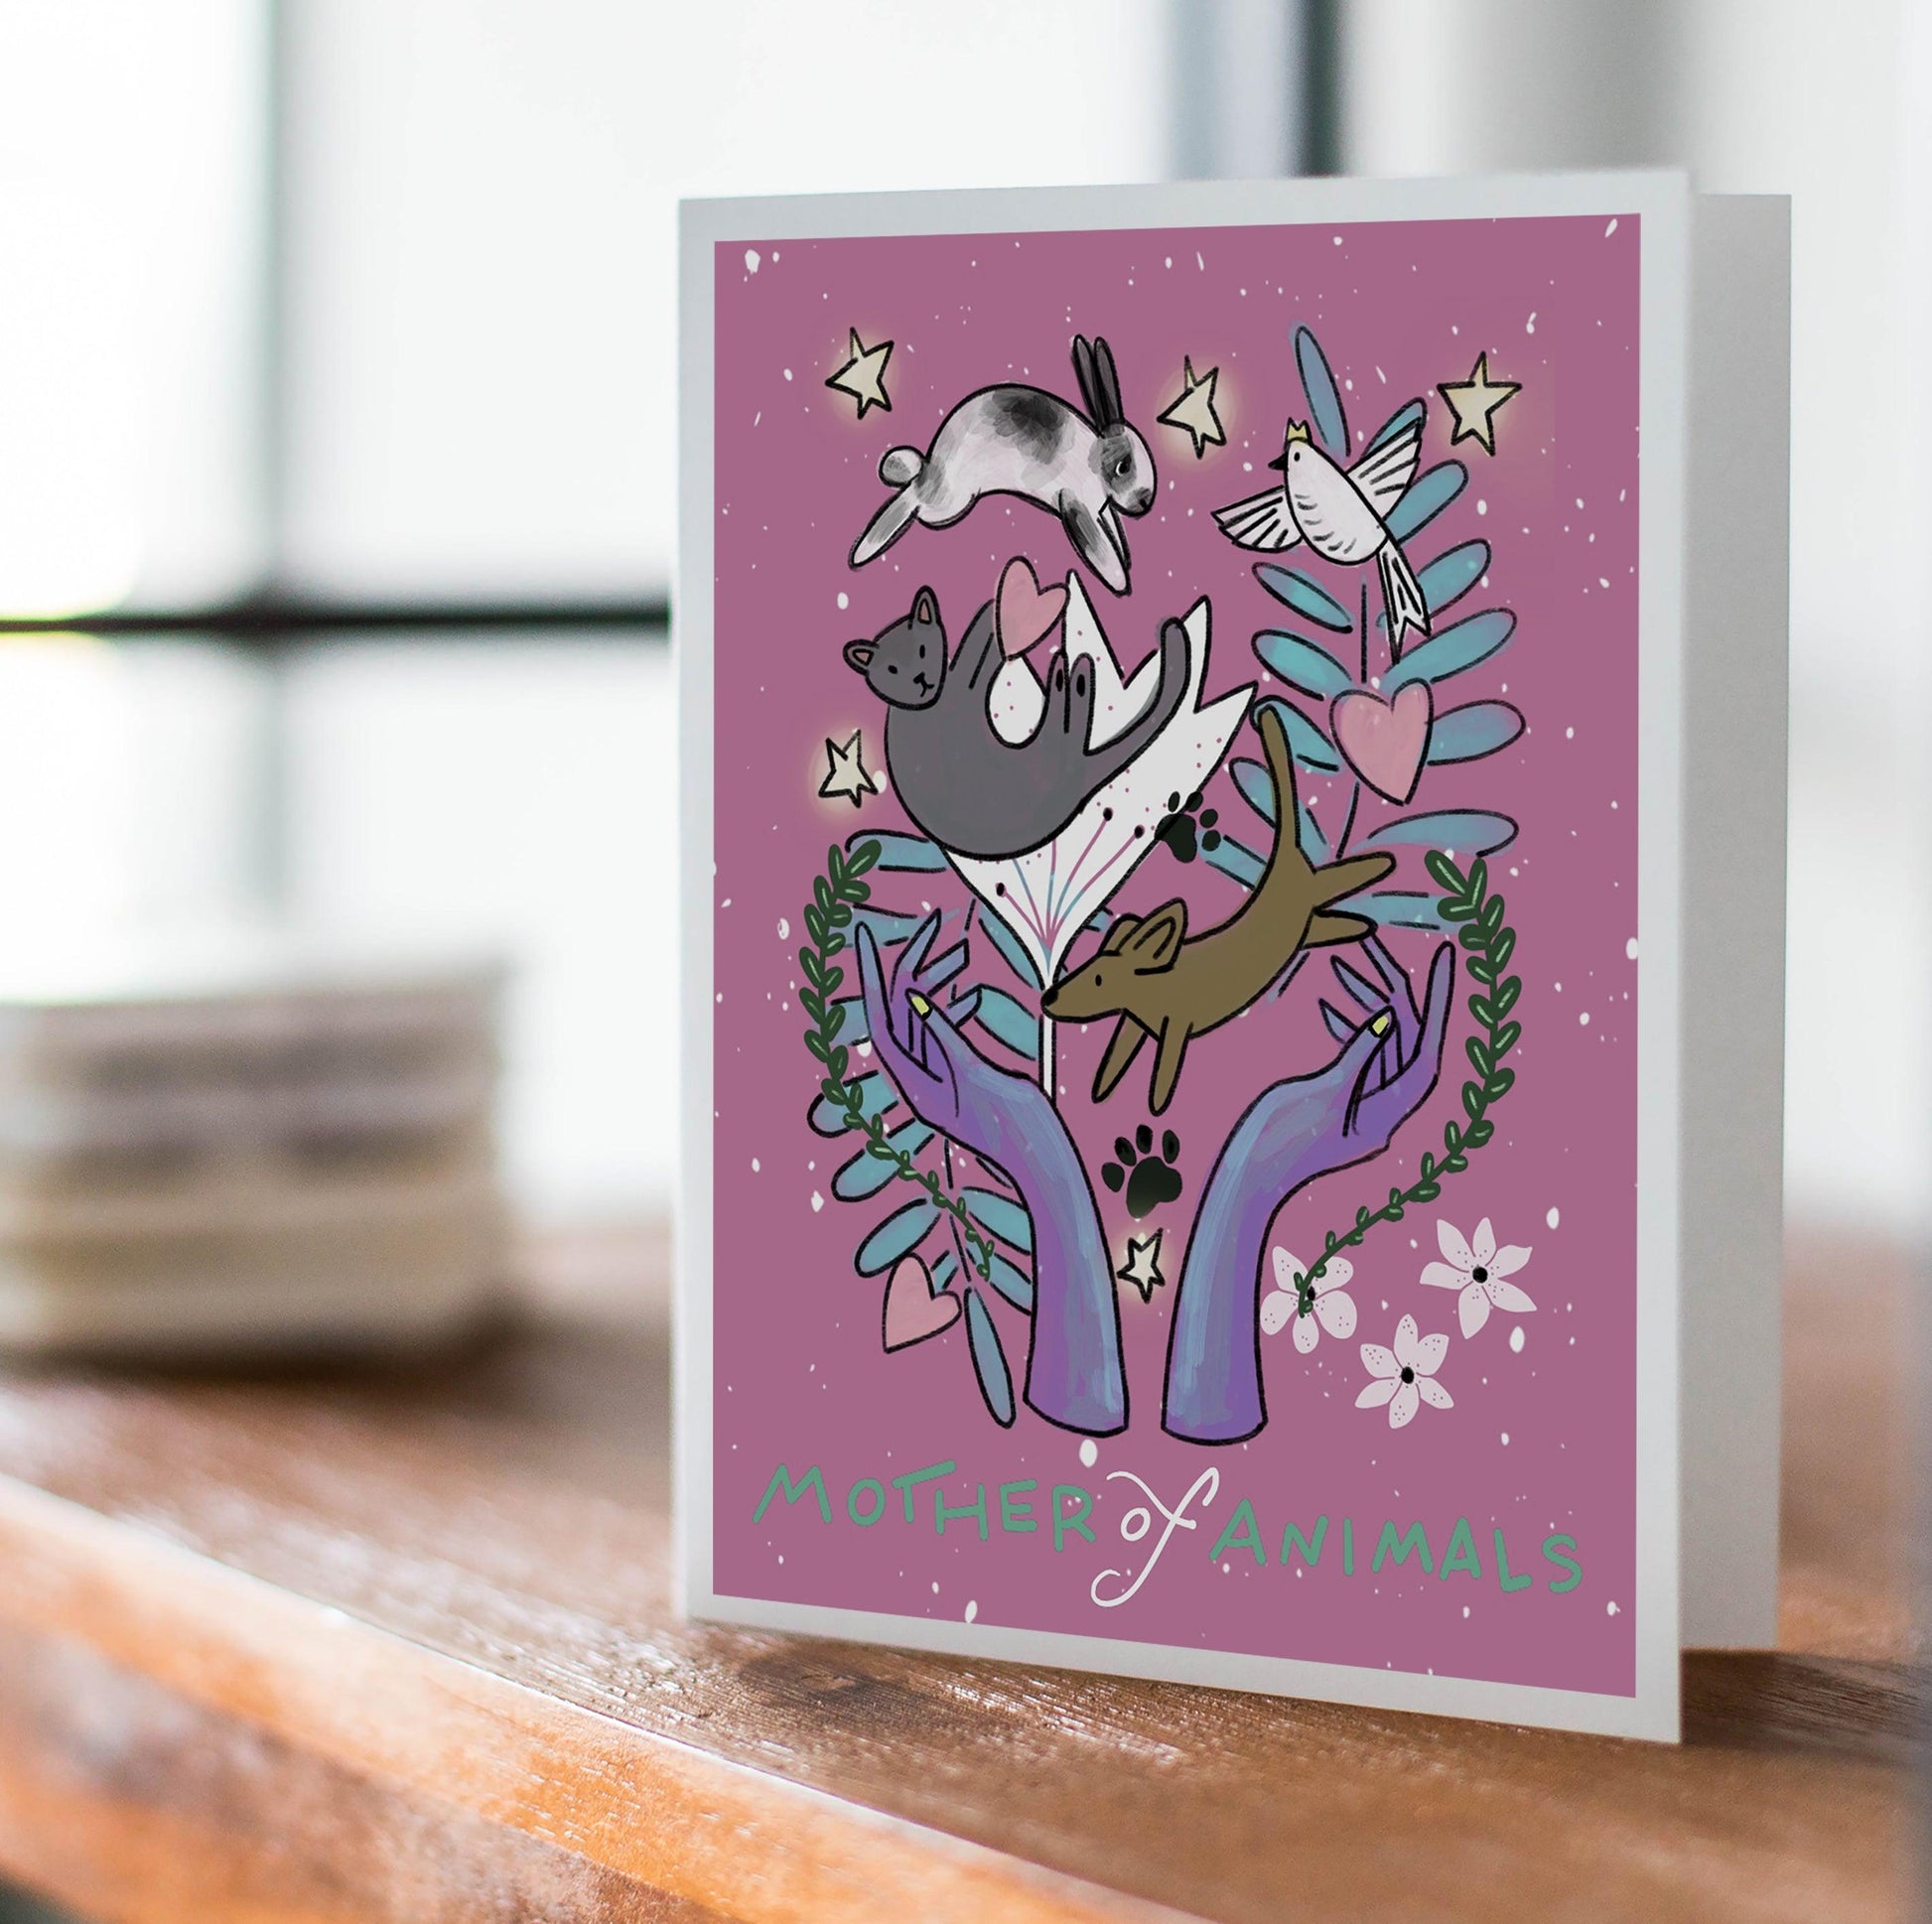 Pink card with two feminine hands holding whimsically drawn dog, cat, bunny, and bird with leaves and stars. Text below reads Mother of Animals